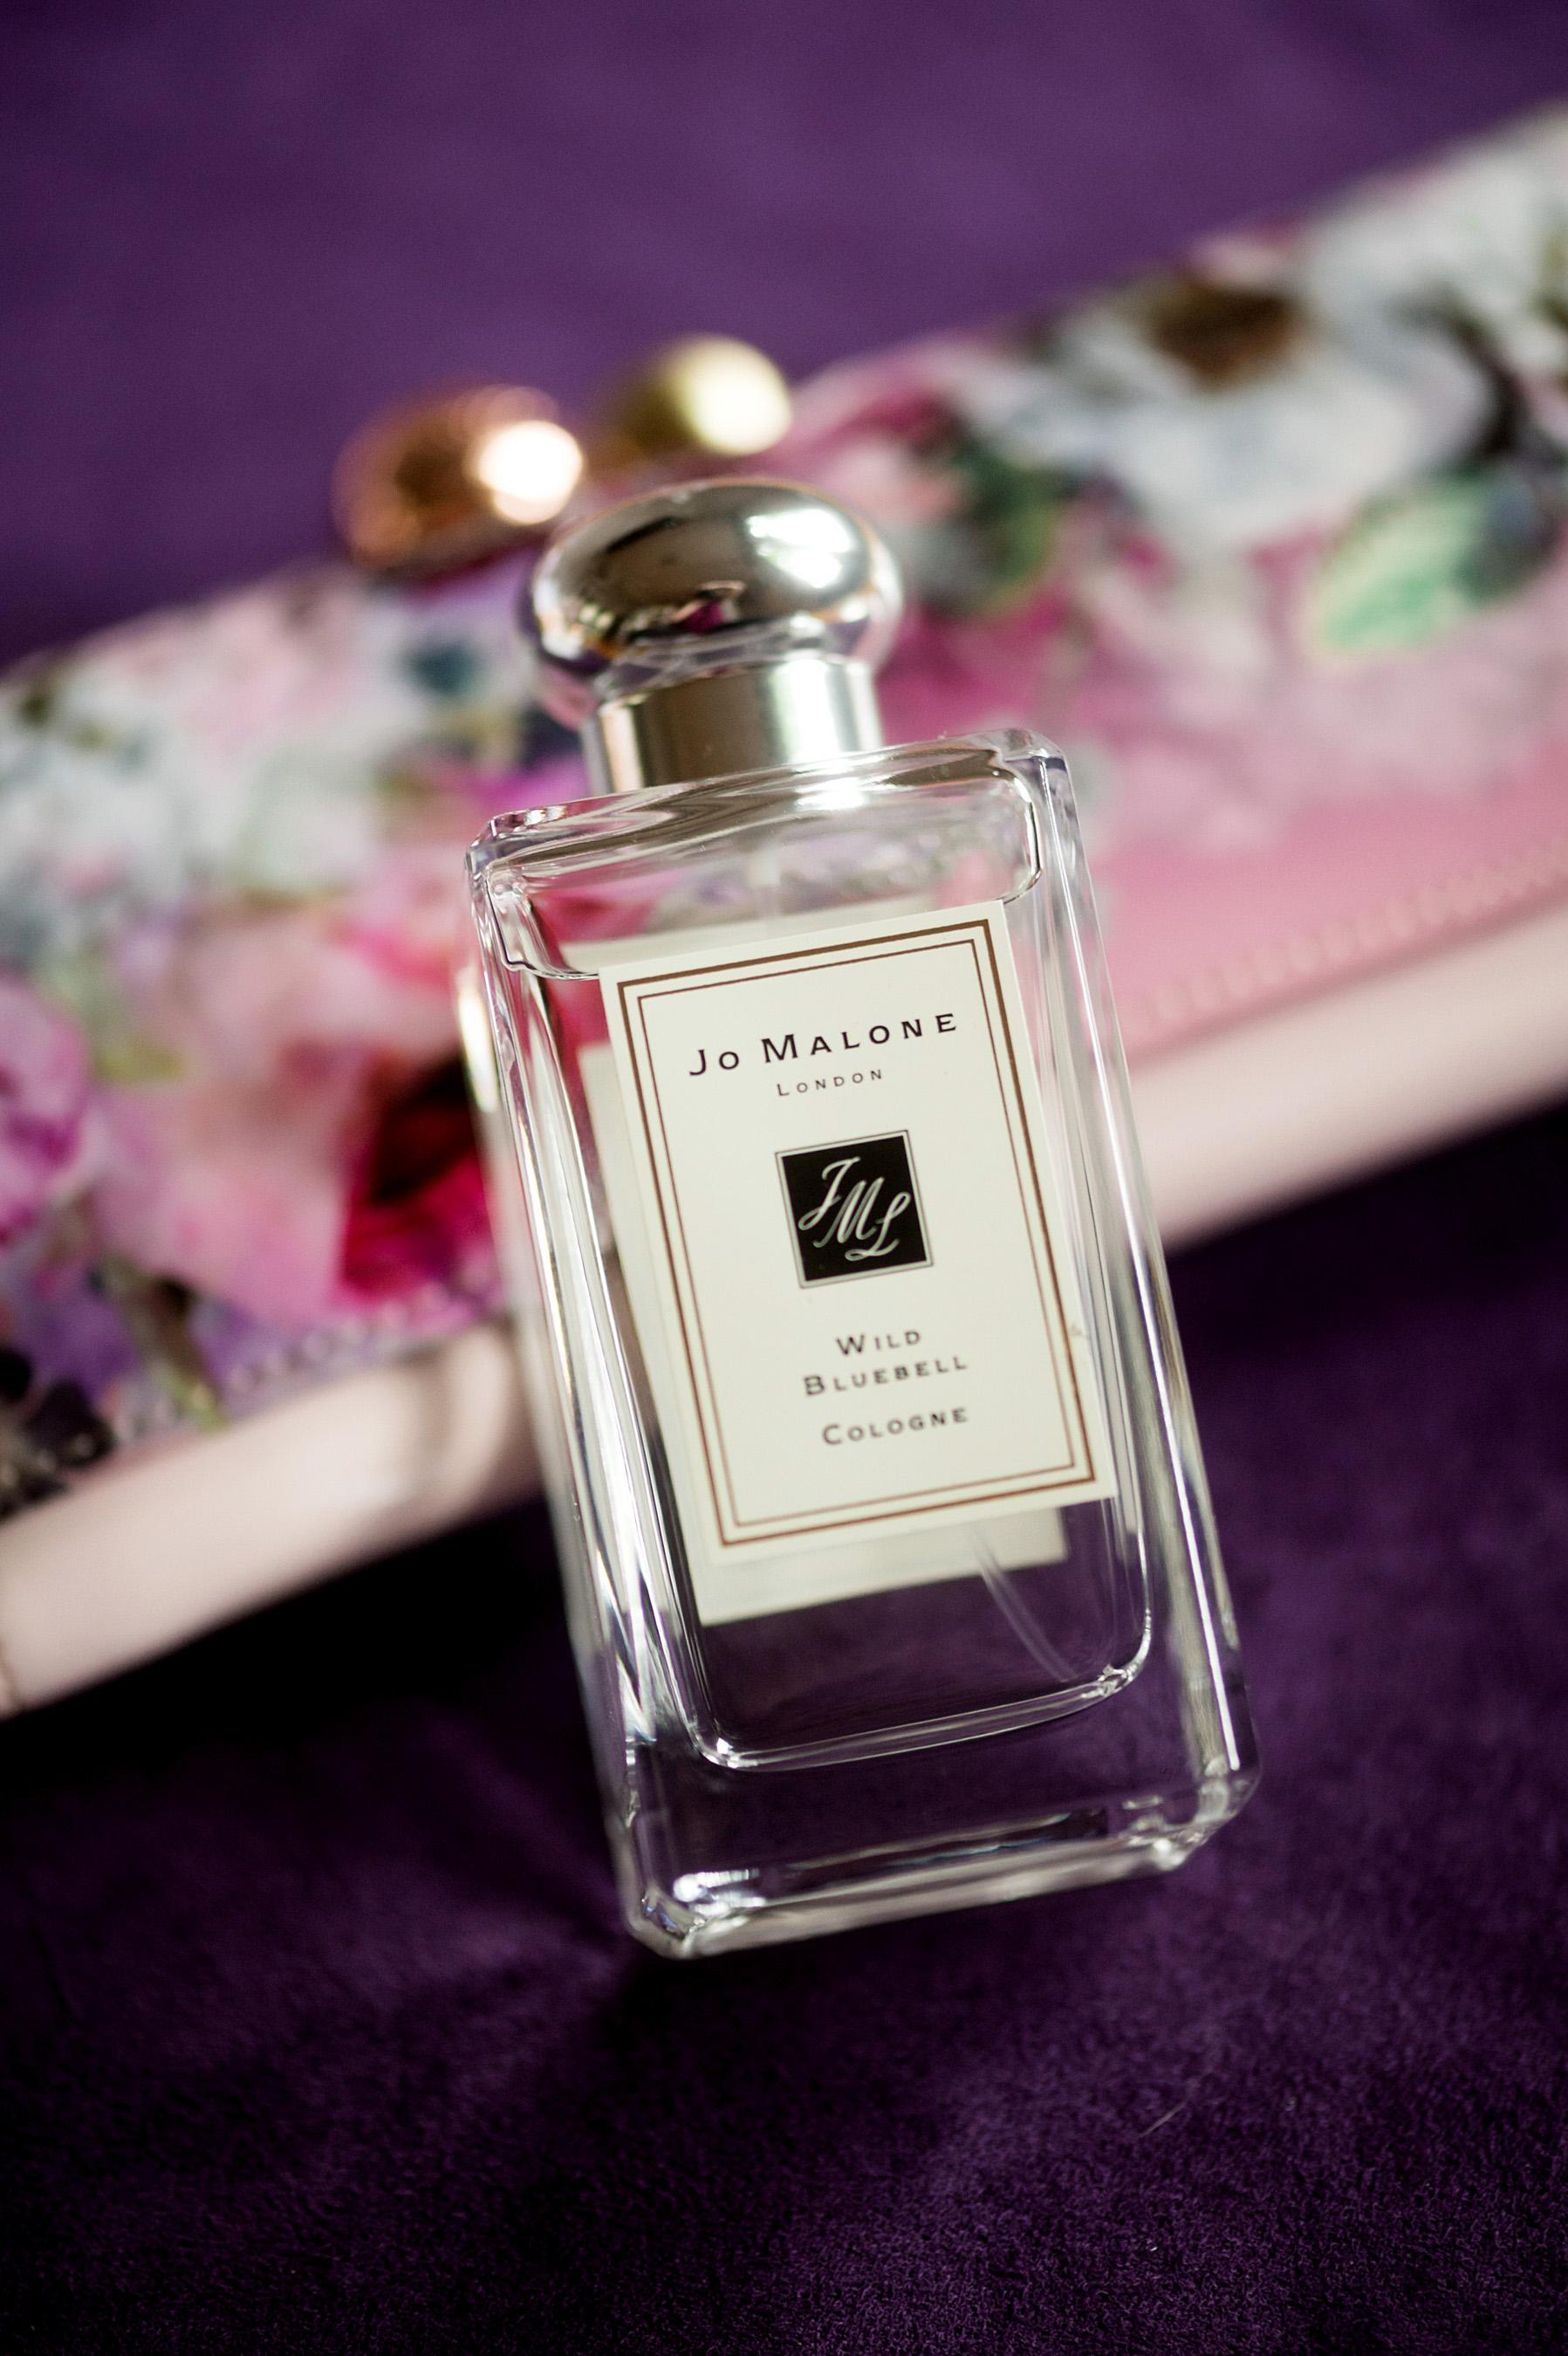 photo of bride's perfume by ashley fisher photography